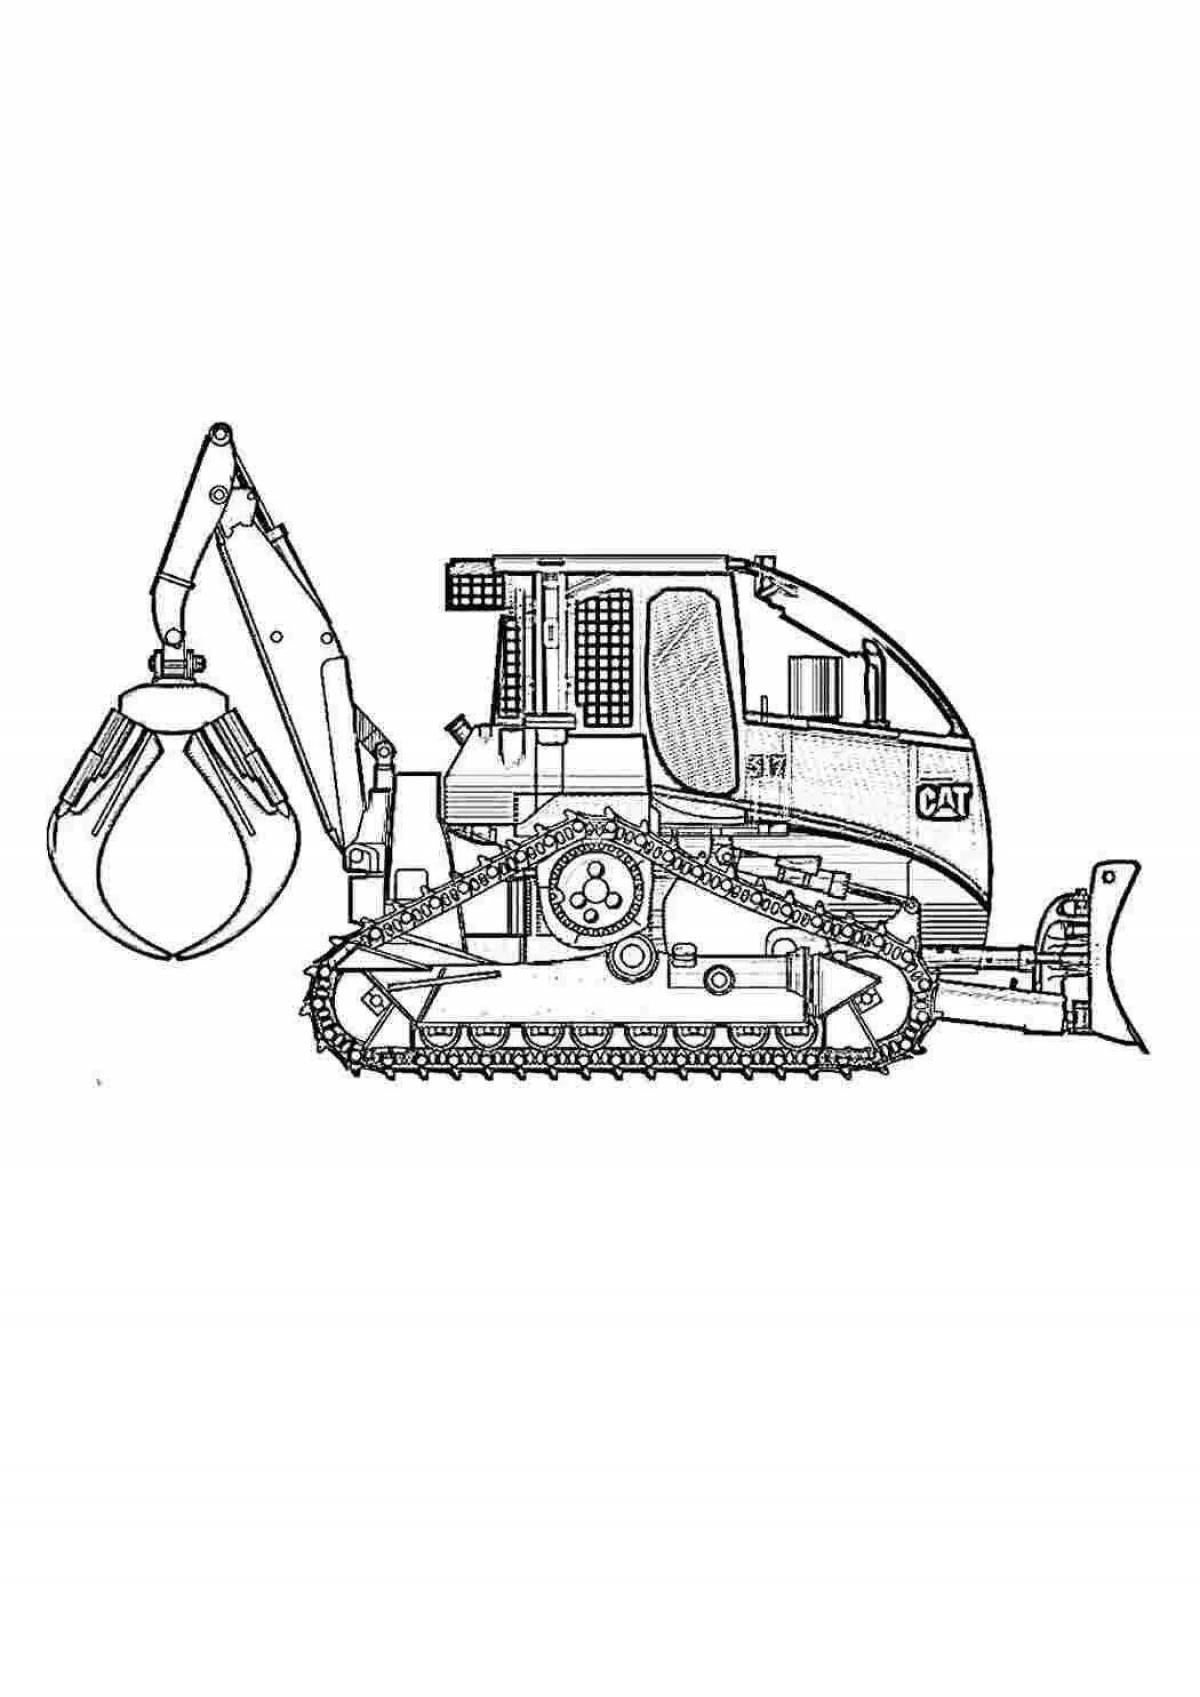 Great construction machinery coloring book for boys